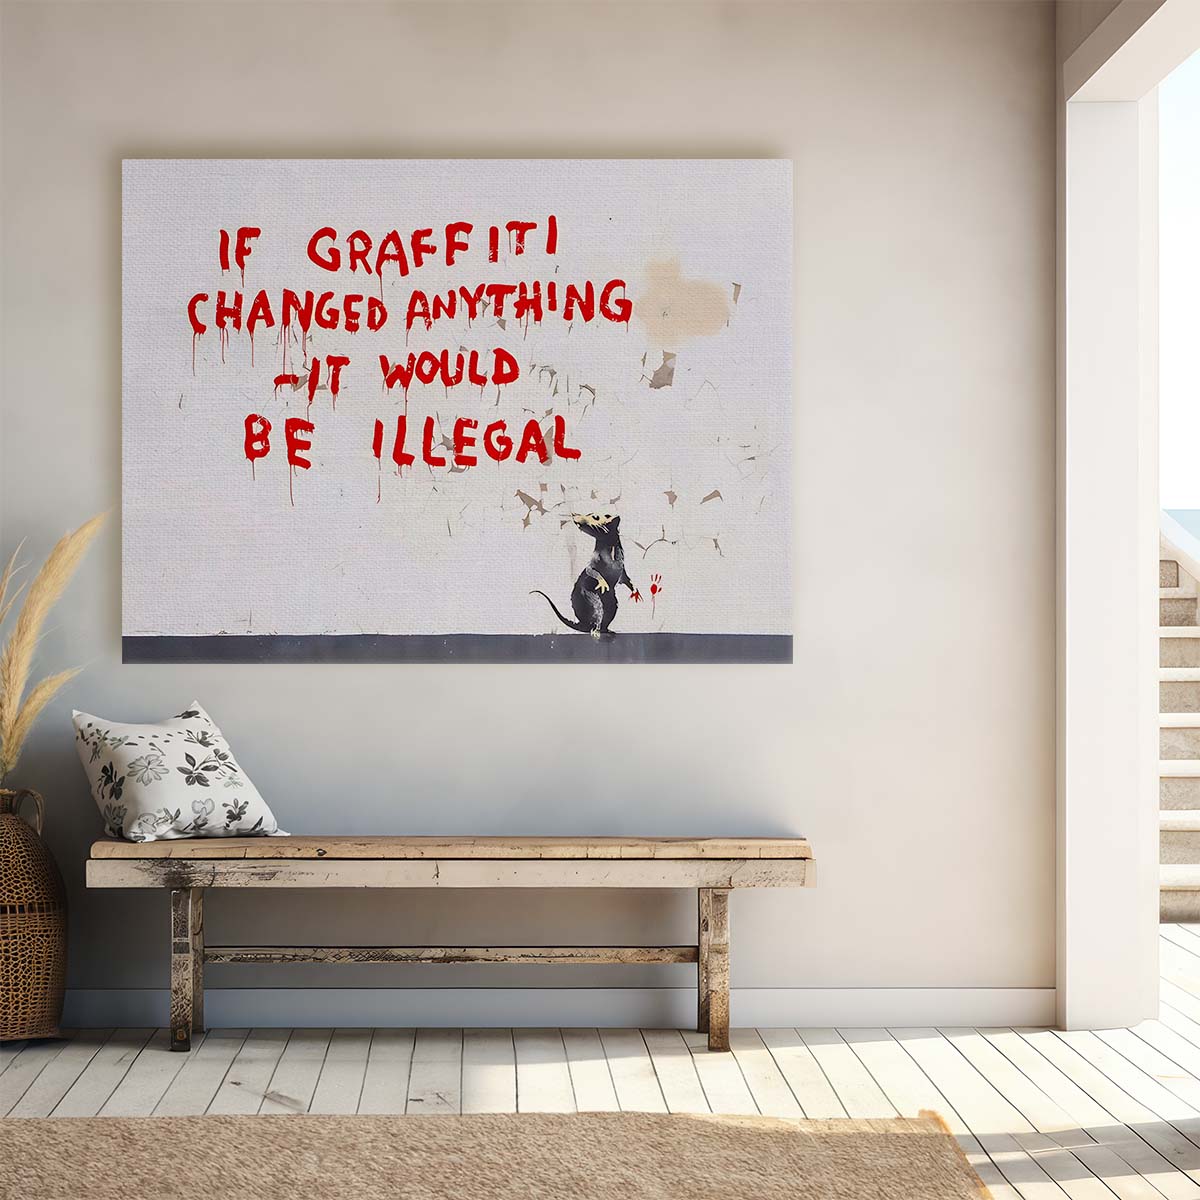 If Graffiti Changed Anything It Would Be Illegal Wall Art by Luxuriance Designs. Made in USA.